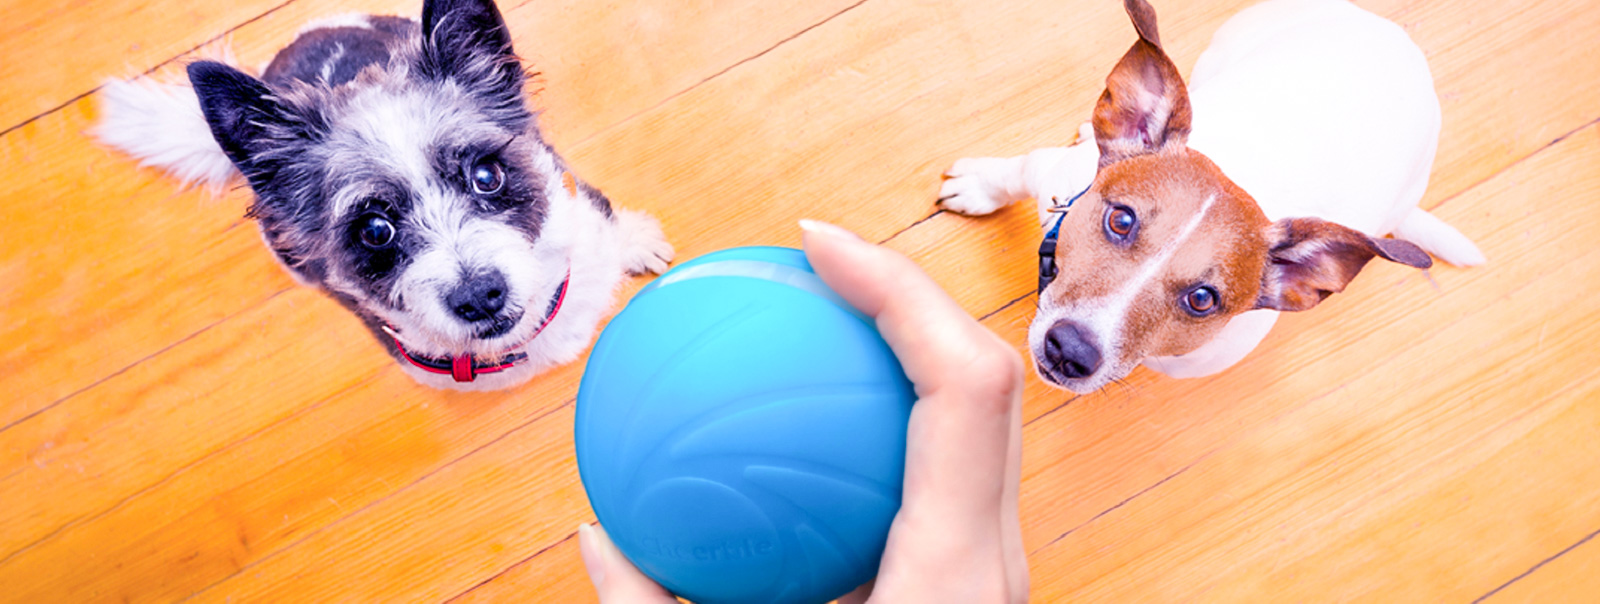 Wicked Ball is an interactive ball for pets